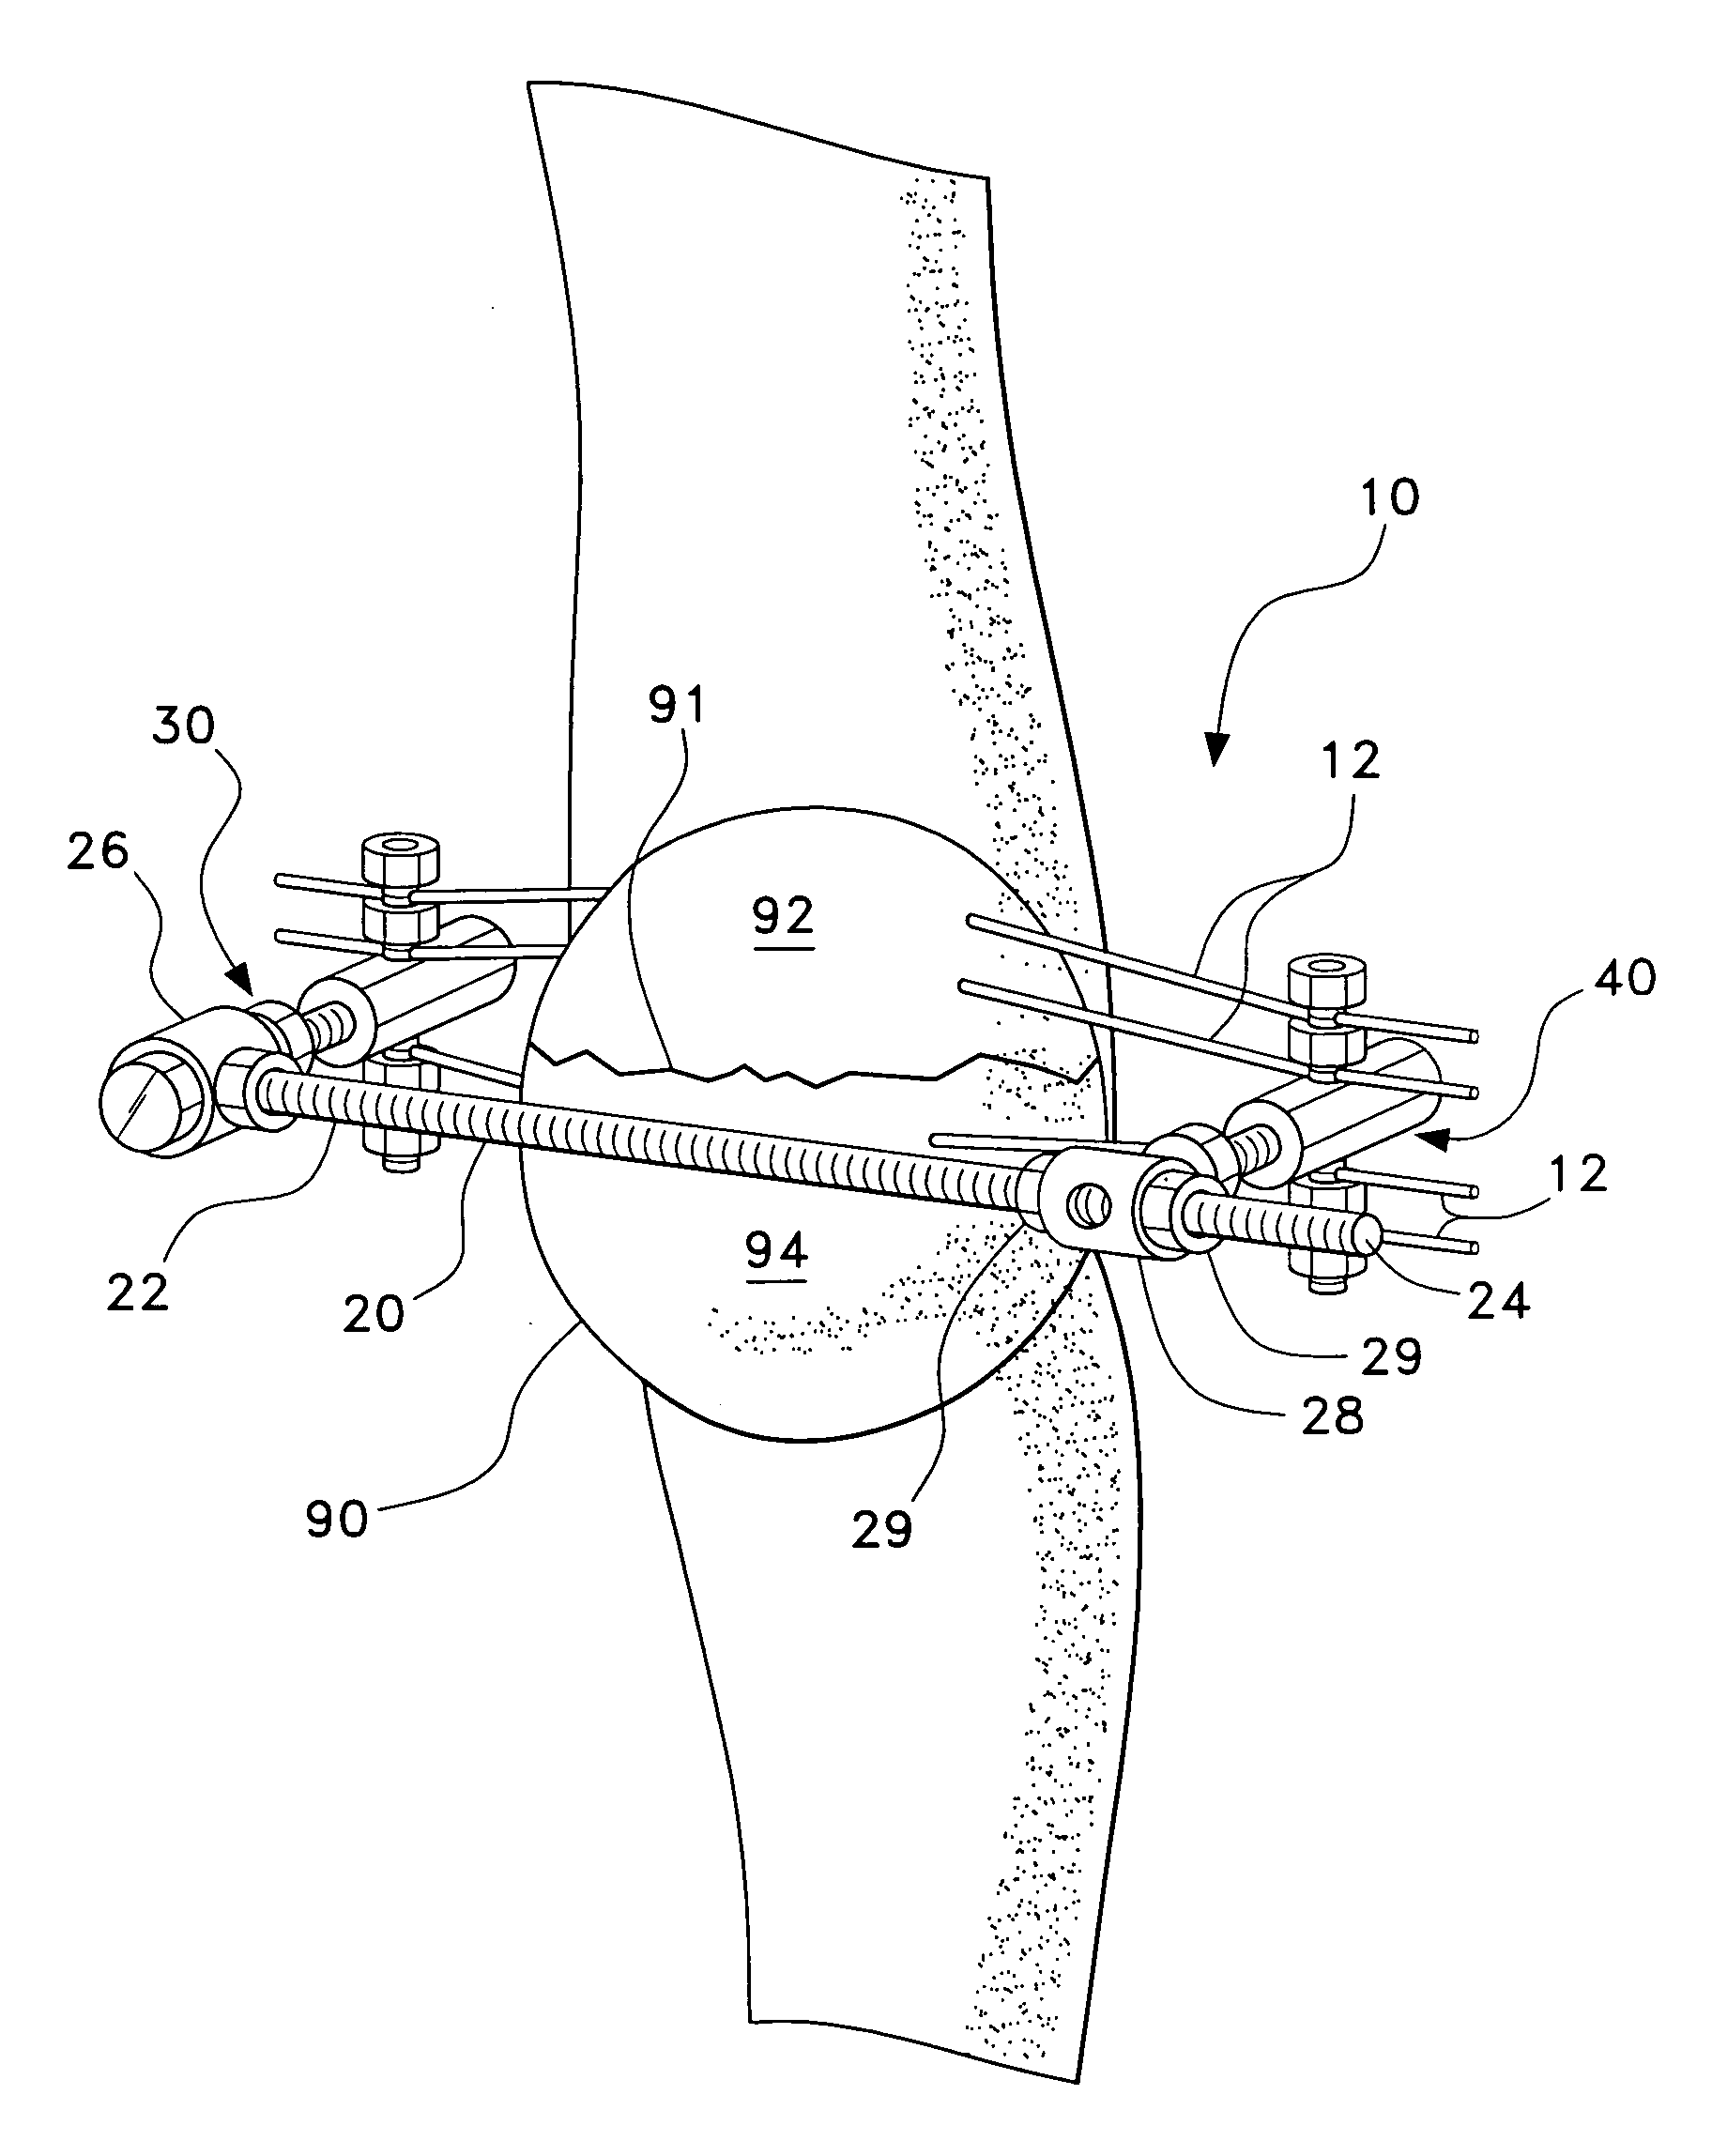 Method and apparatus for external fixation of bone fractures